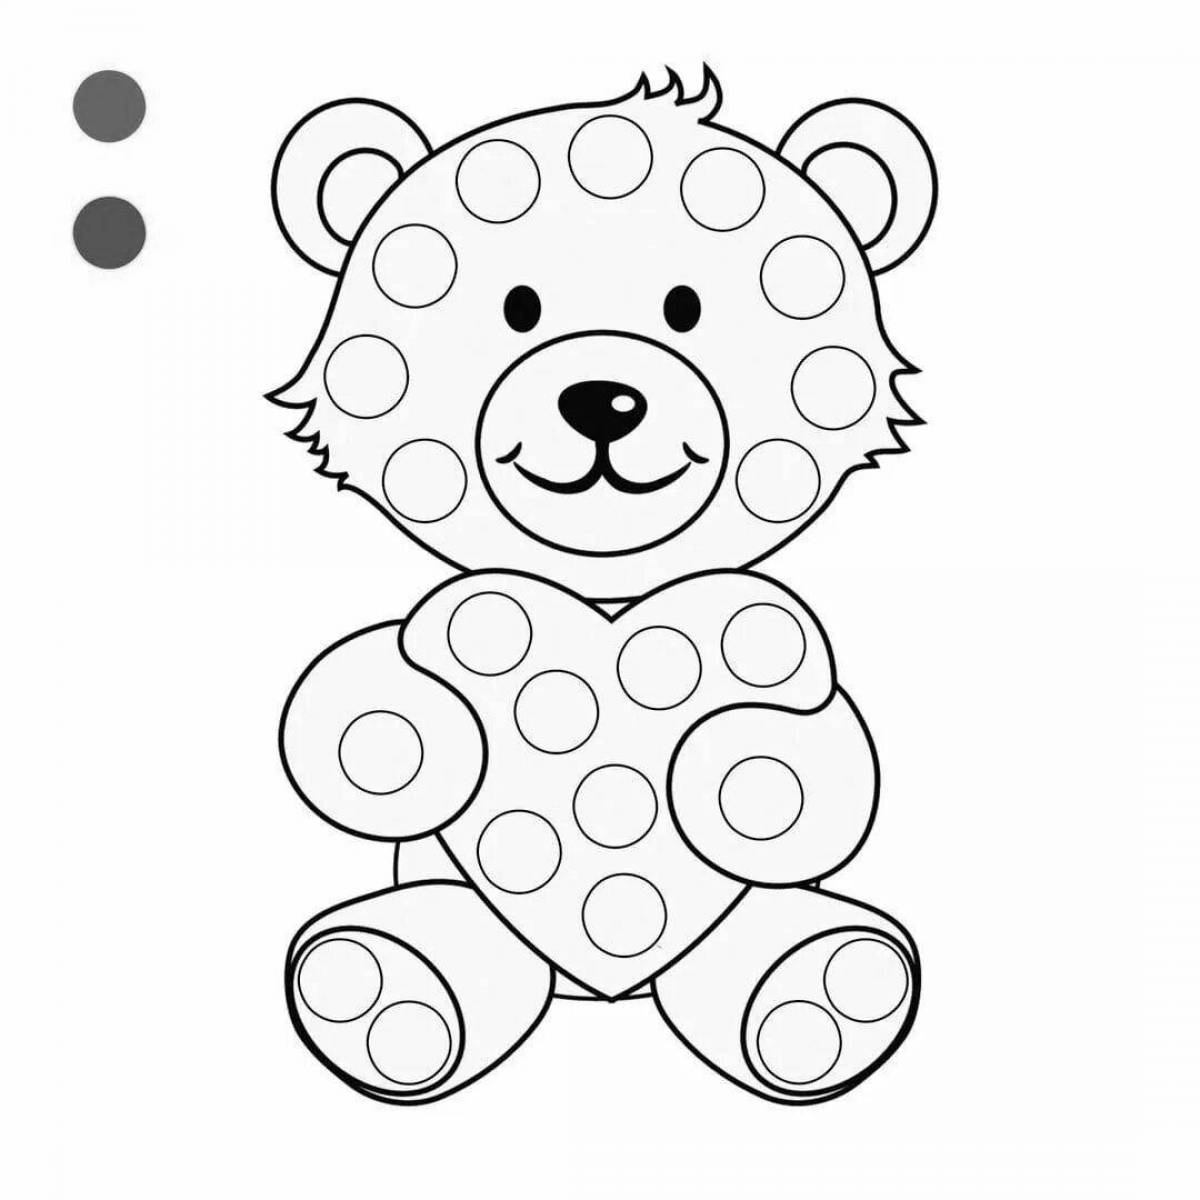 Vibrant finger coloring page for kids